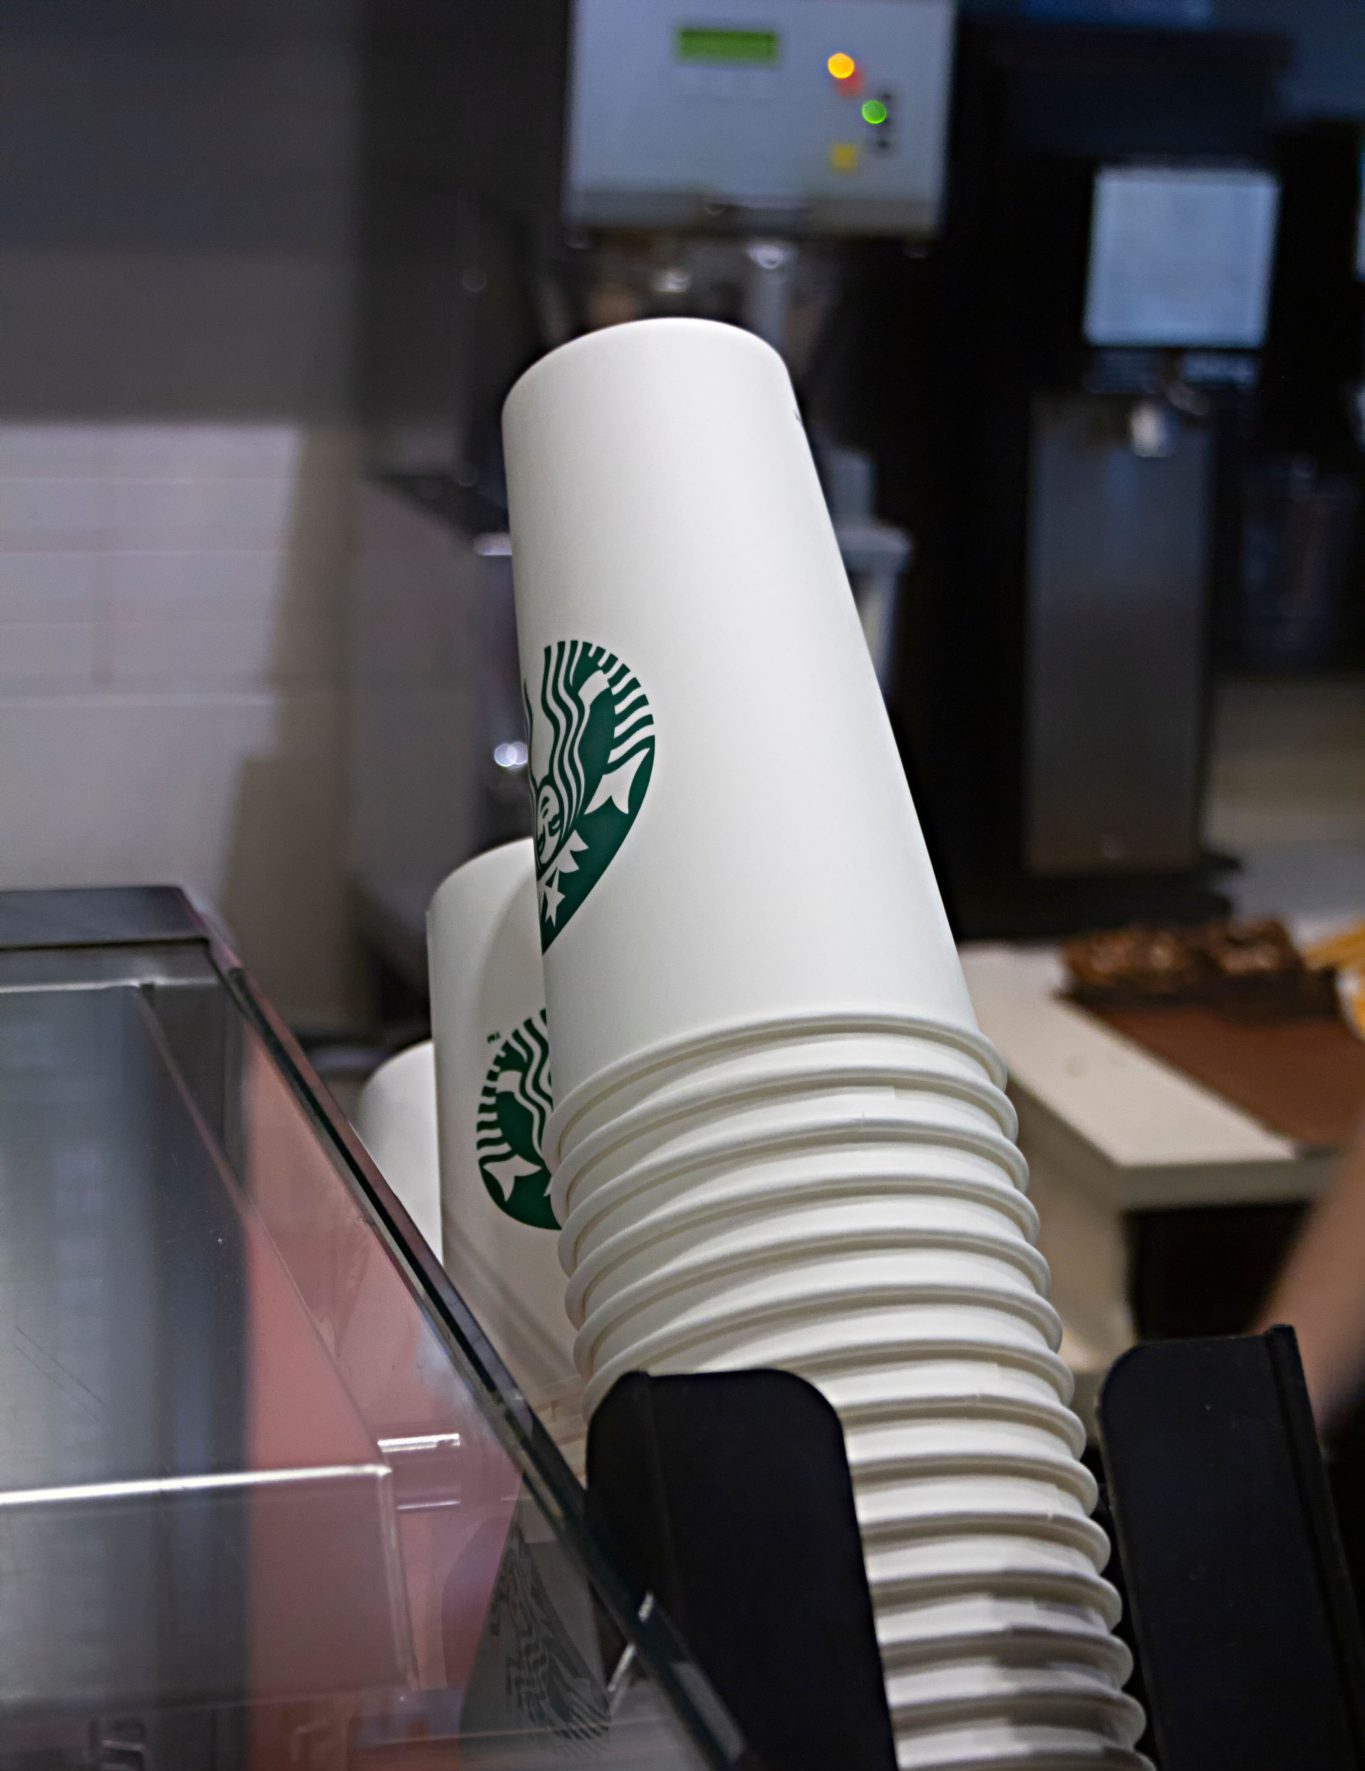 Starbucks disposable paper cups are seen in October 2020.